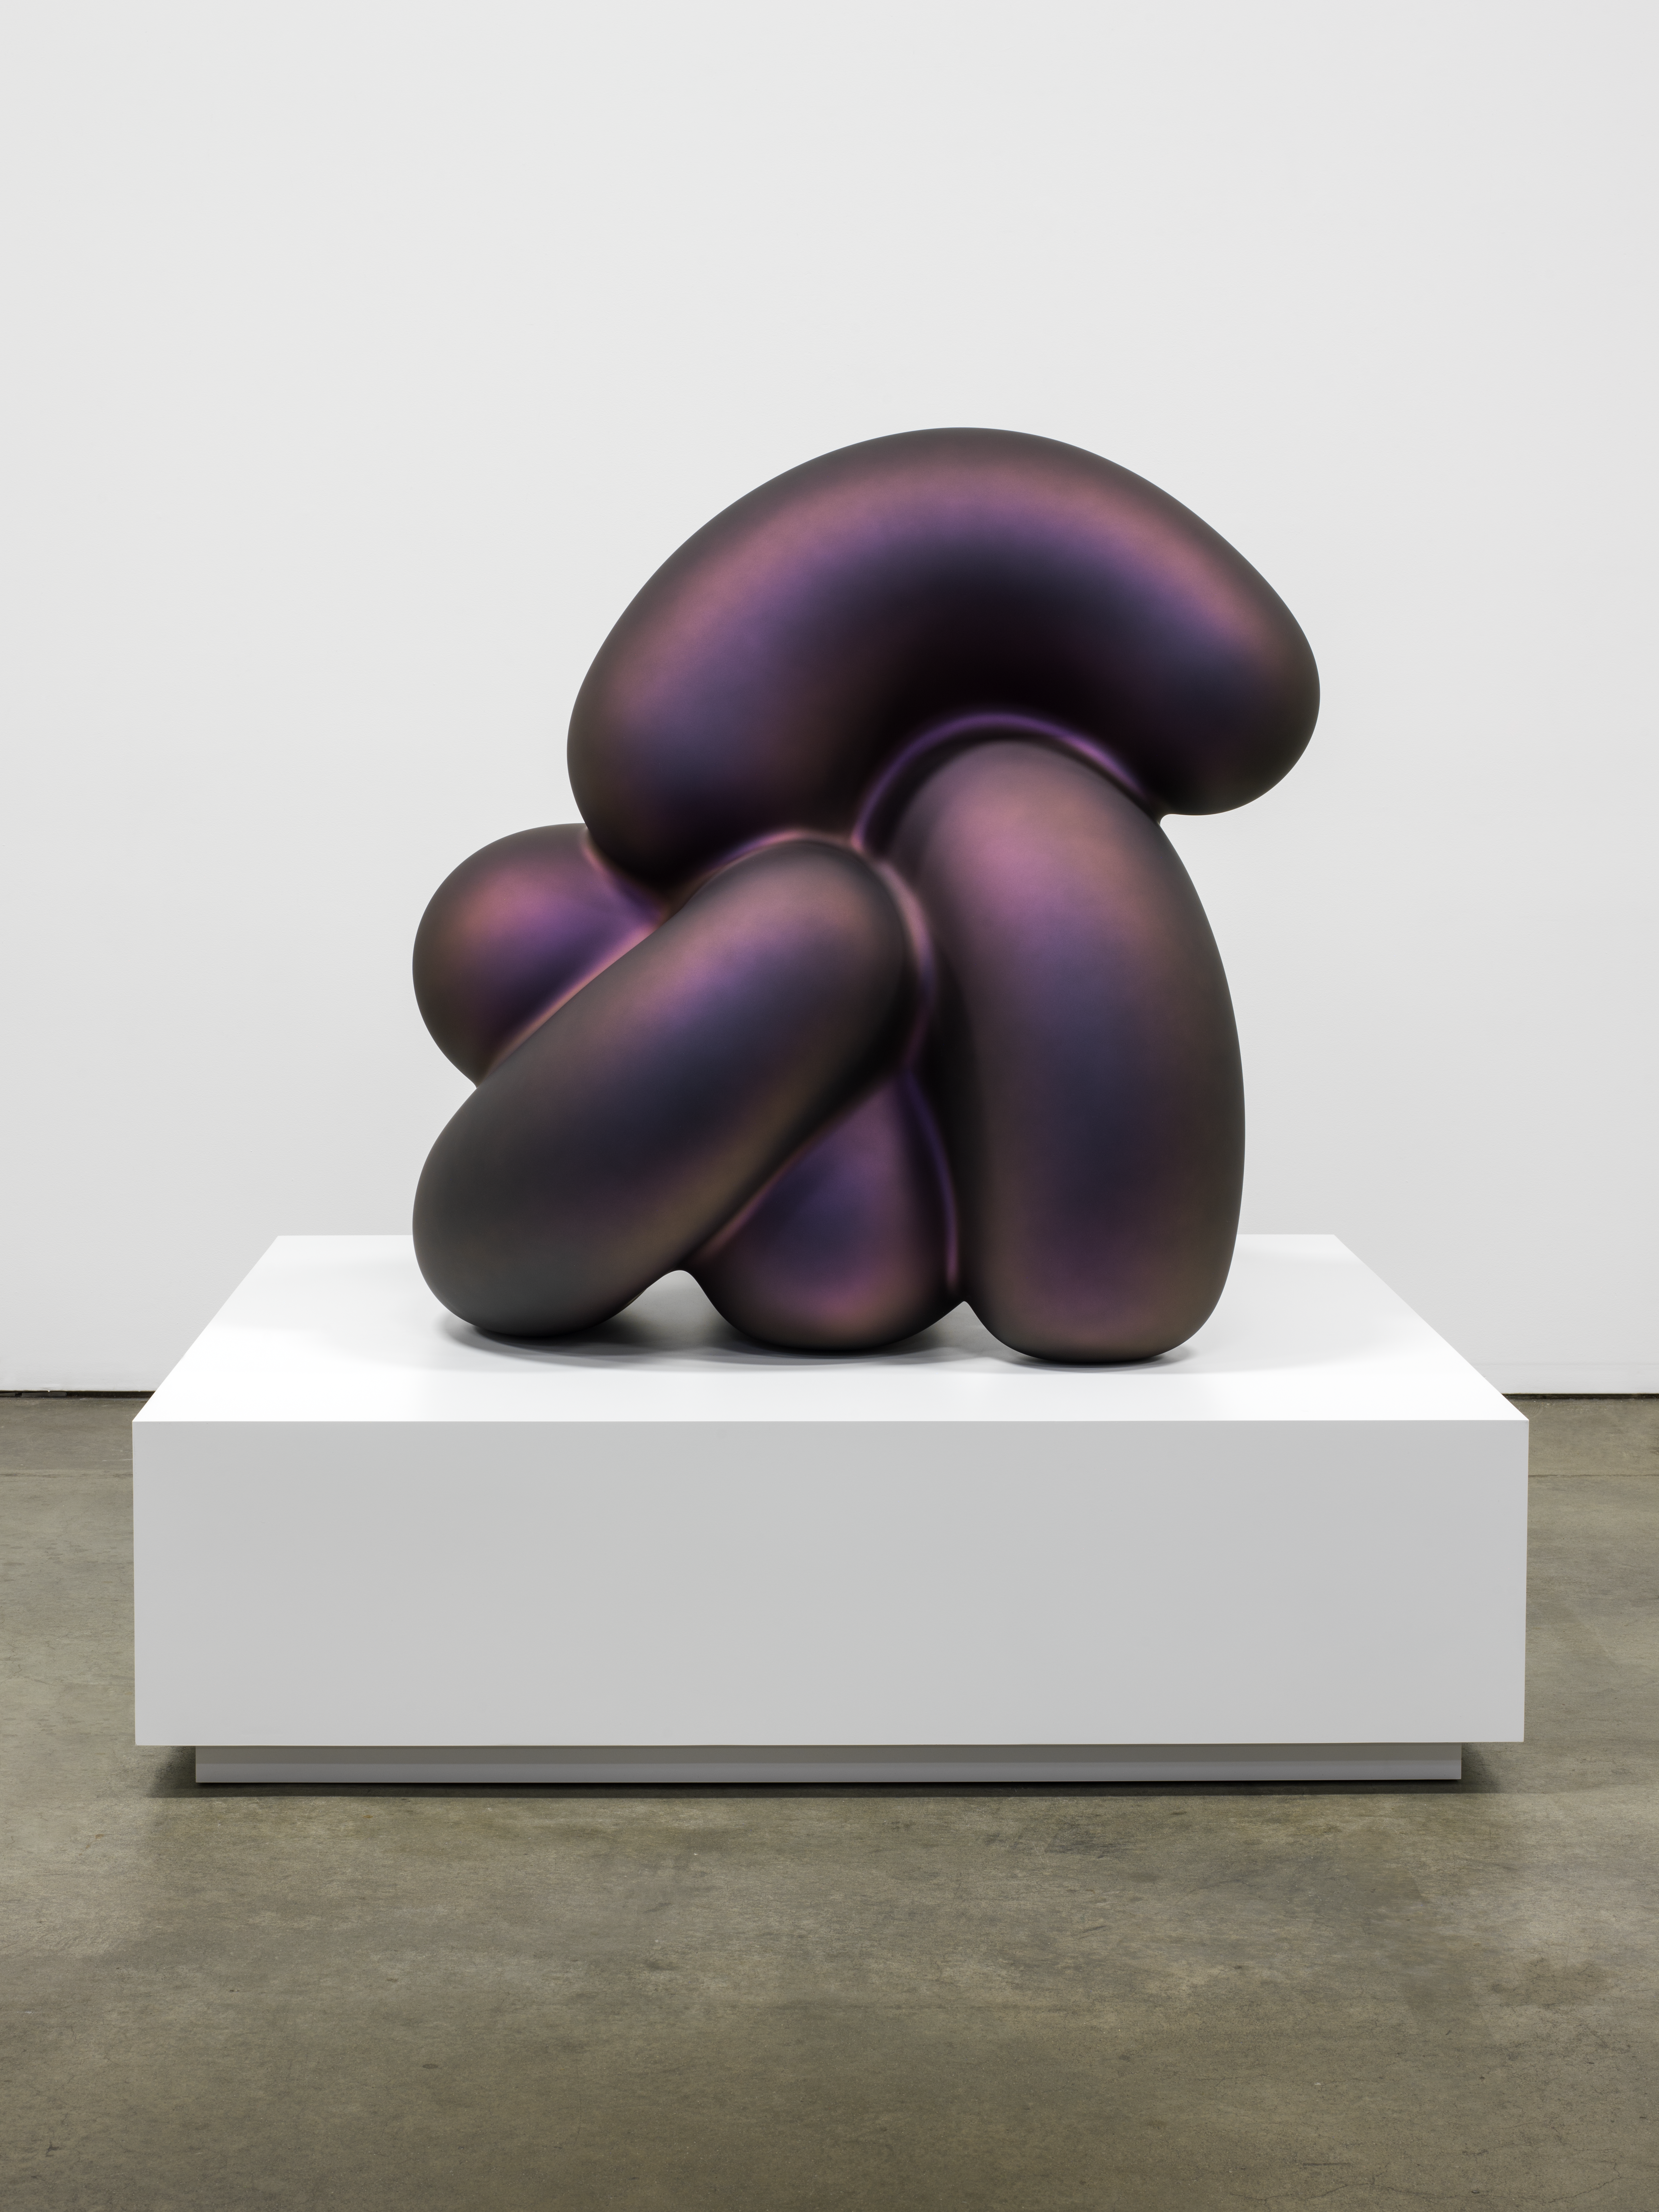 Ken Price (American, 1935–2012), Ceejay, 2011. Painted bronze composite, 121.9 x 122.9 x 116.8 cm. Nancy A. Nasher and David J. Haemisegger Collection. Image courtesy of Matthew Marks Gallery, New York, NY / © Estate of Ken Price / photo: Fredrik Nilsen